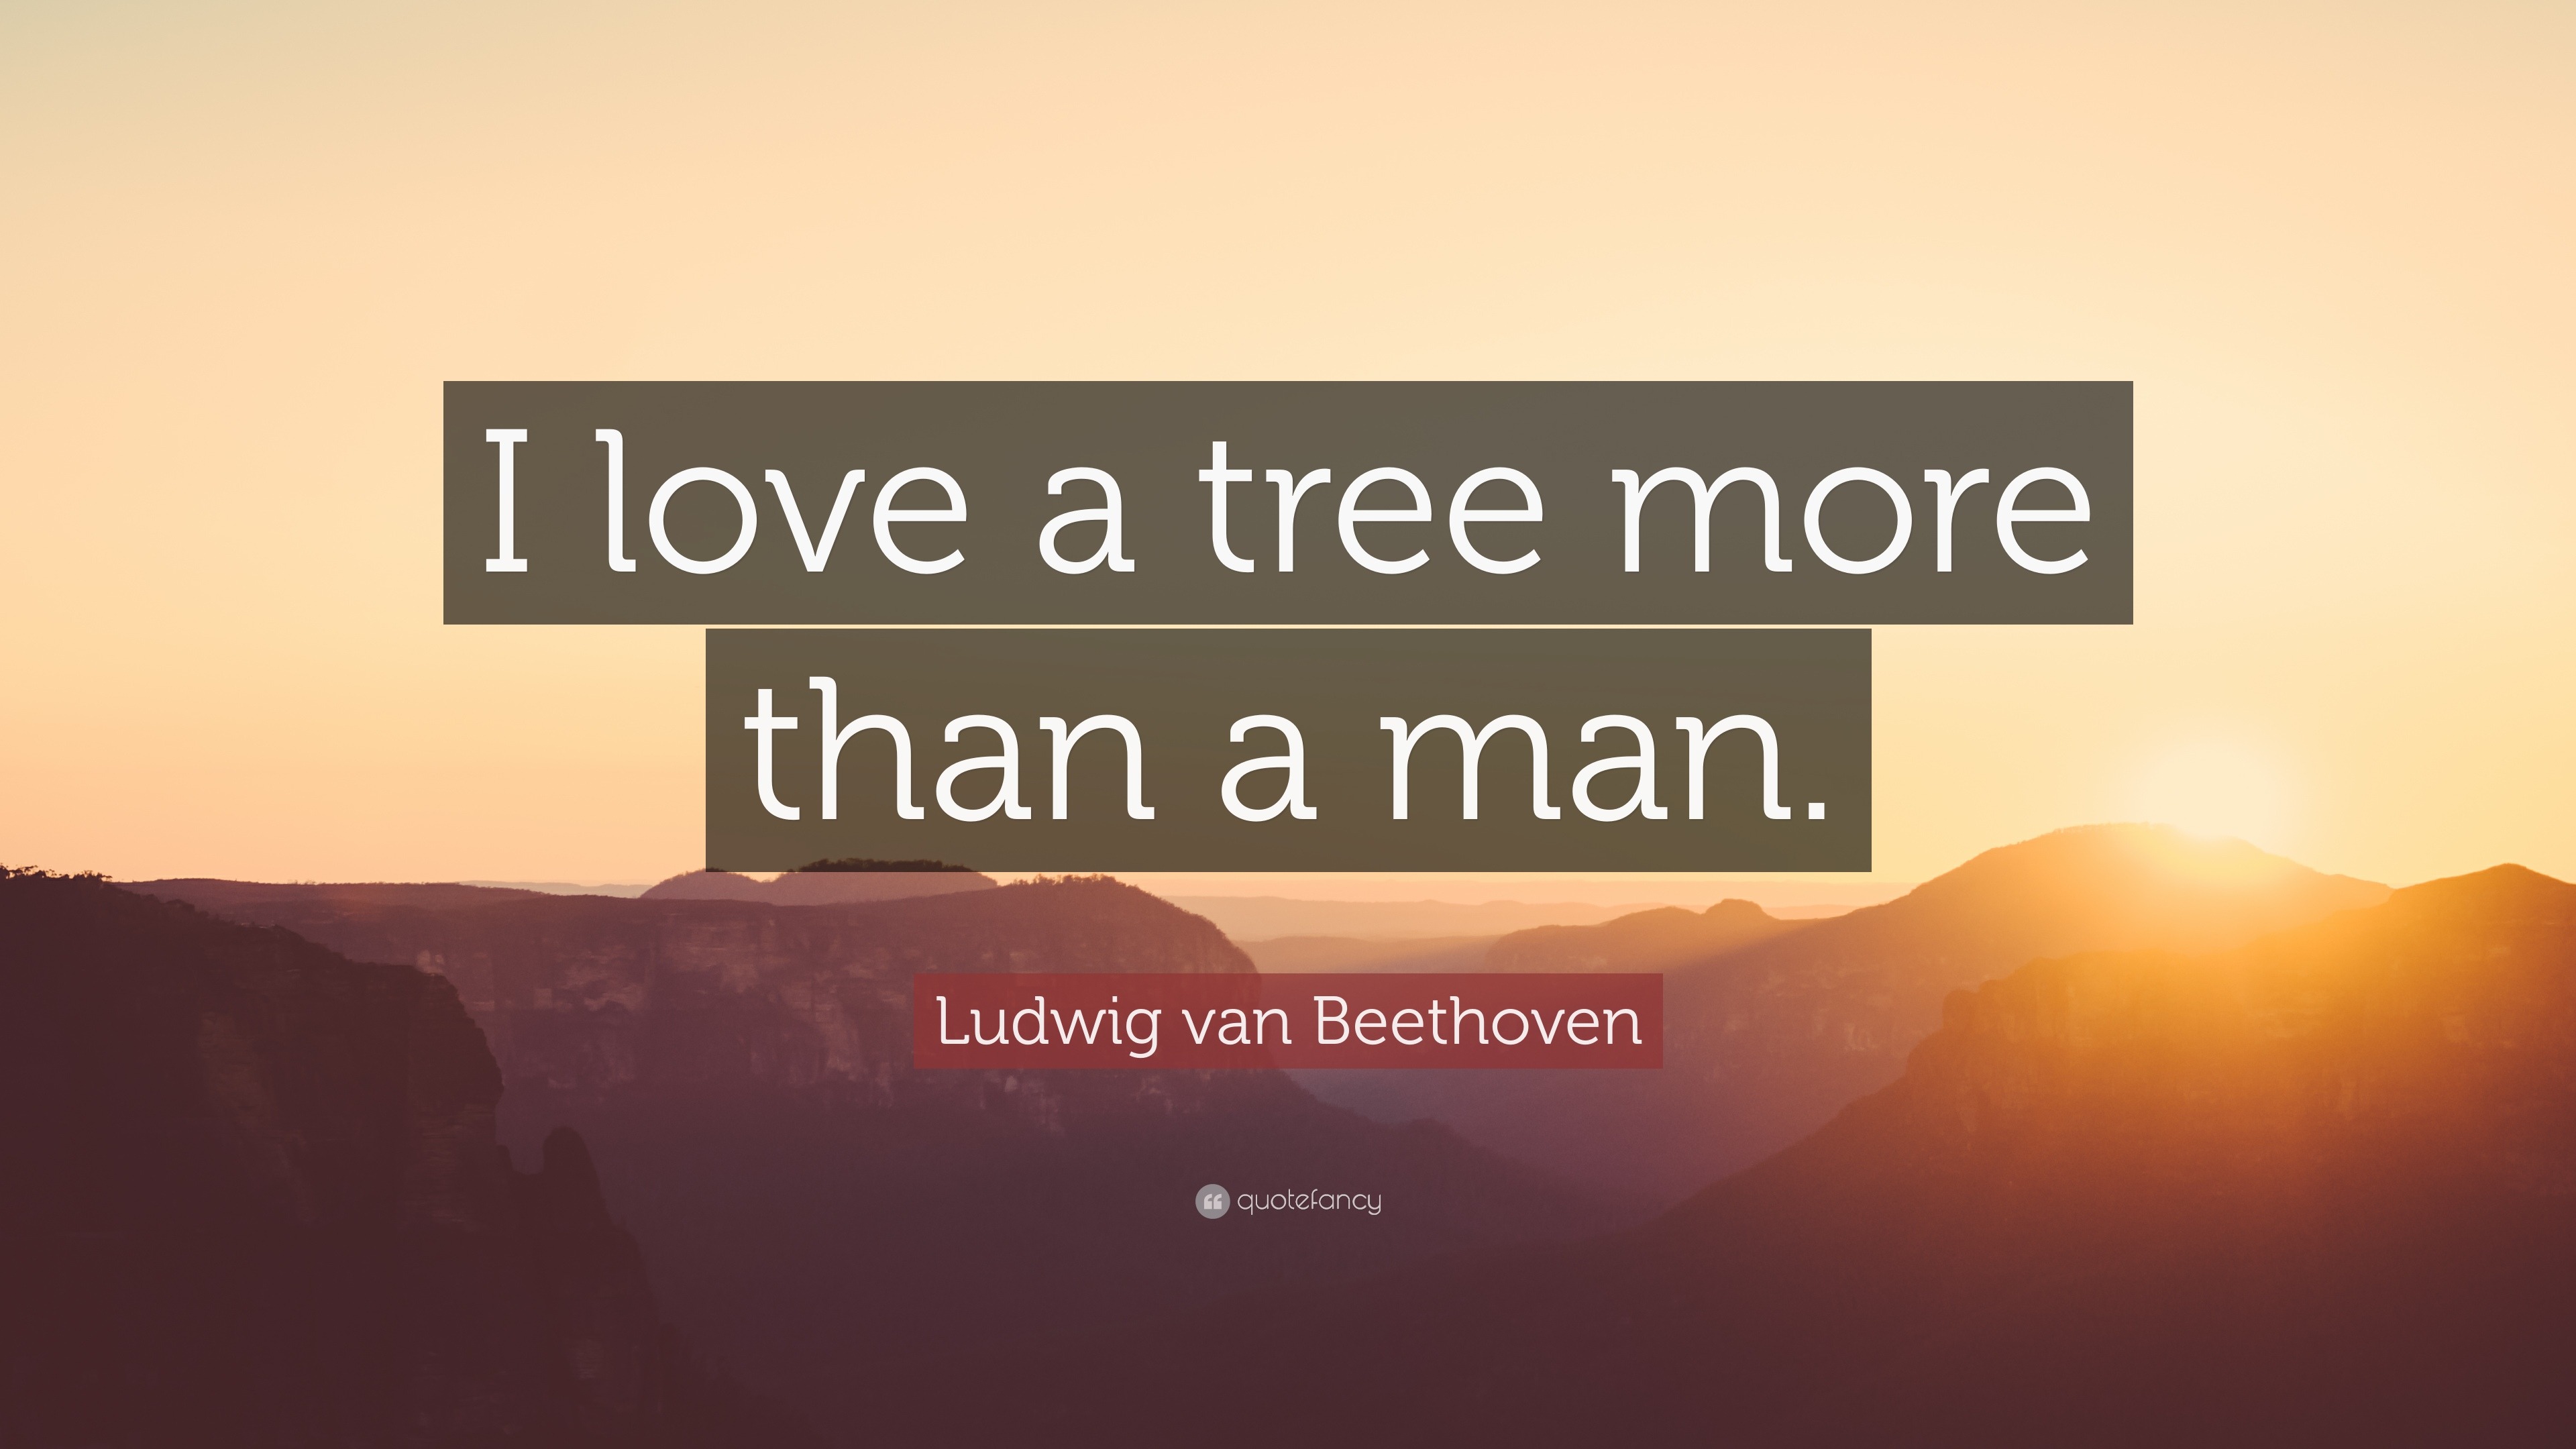 Ludwig van Beethoven Quote “I love a tree more than a man ”